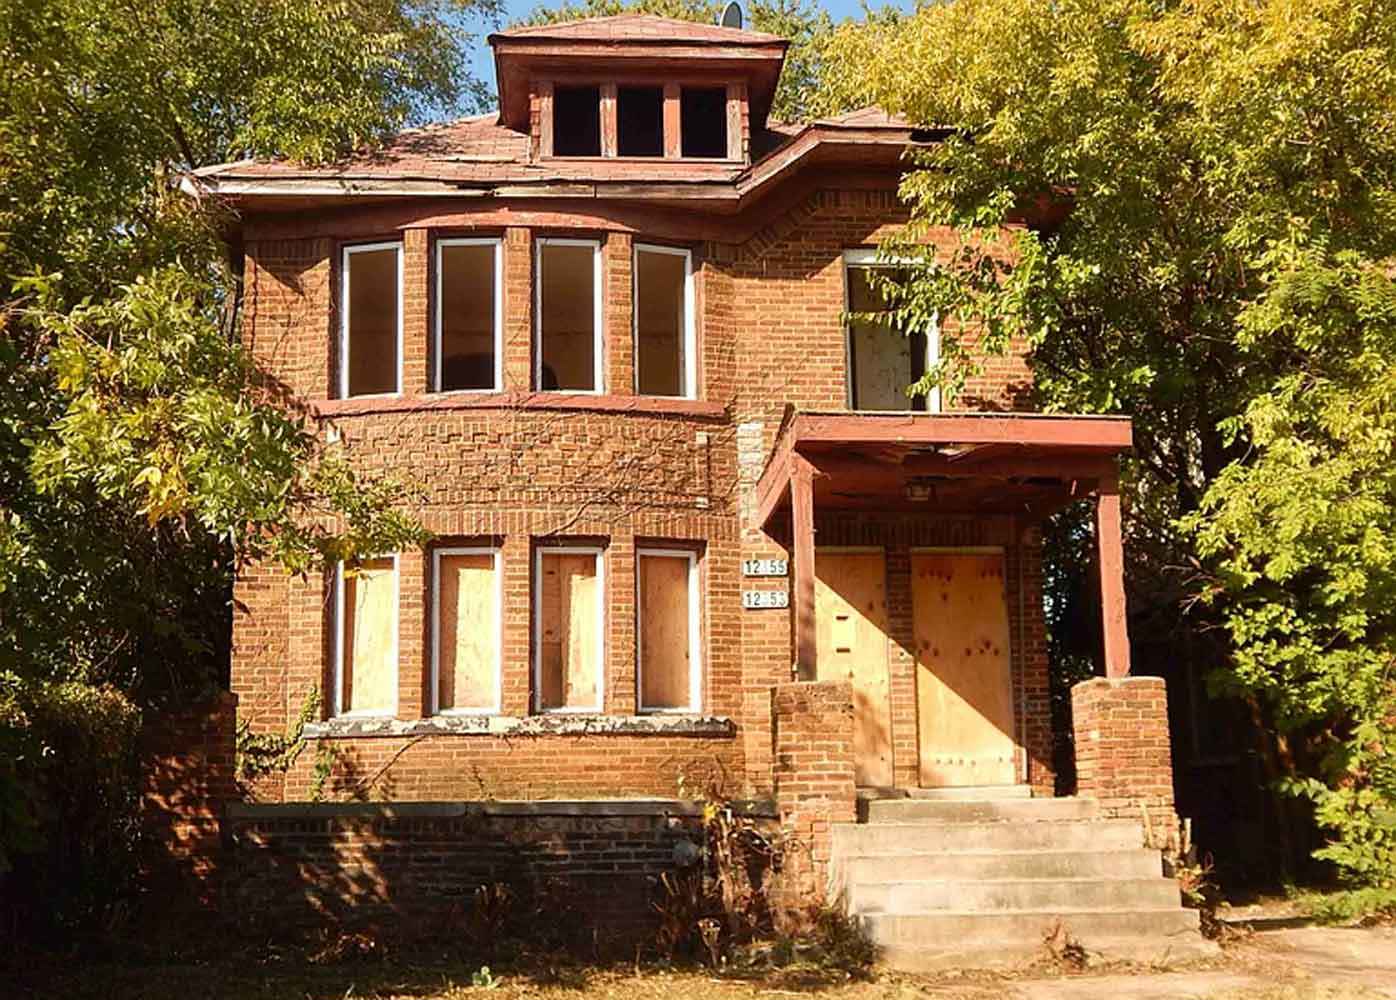 This six-bedroom house is on sale for $1500 in the US city of Detroit.